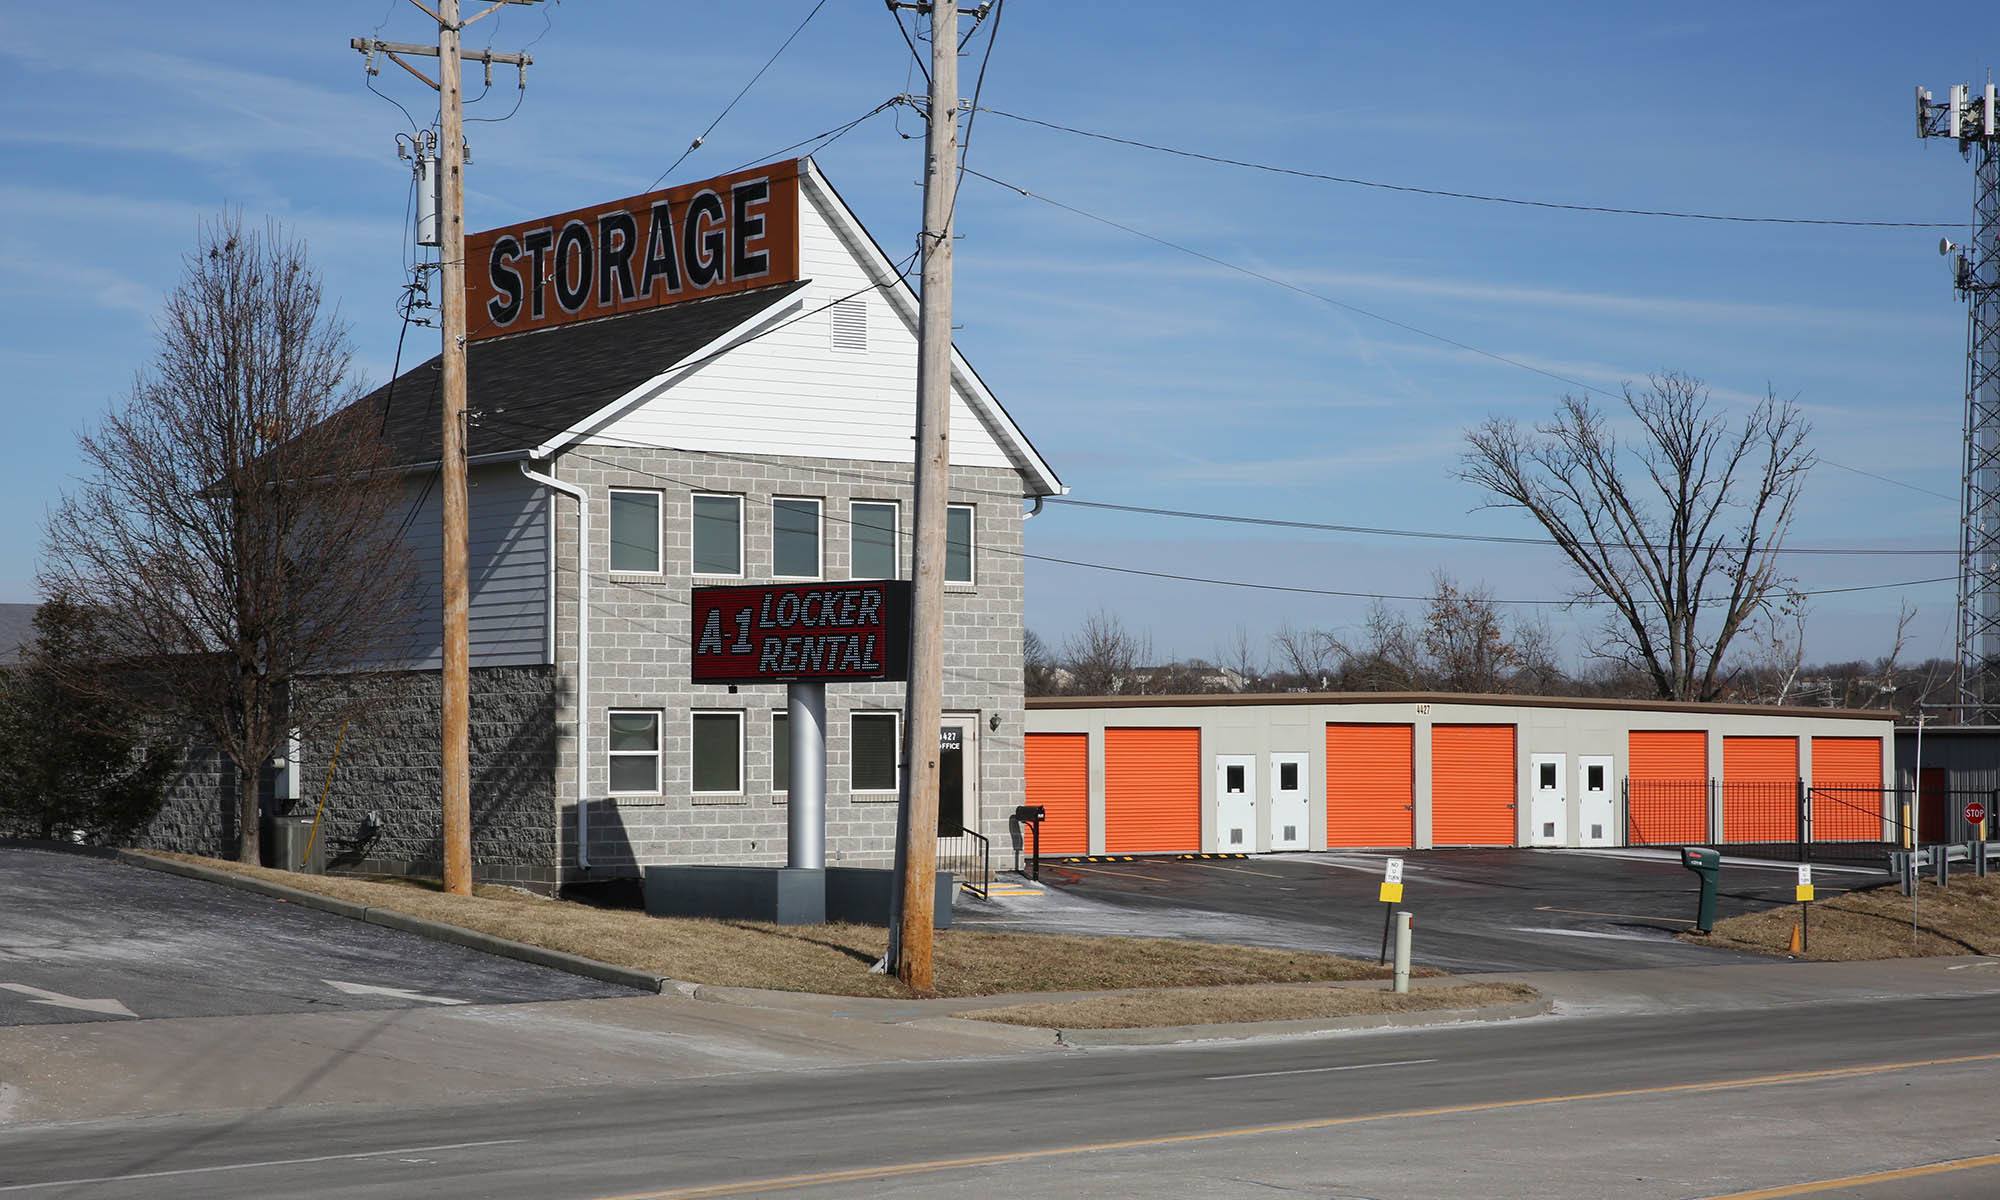 Self storage in St. Louis MO